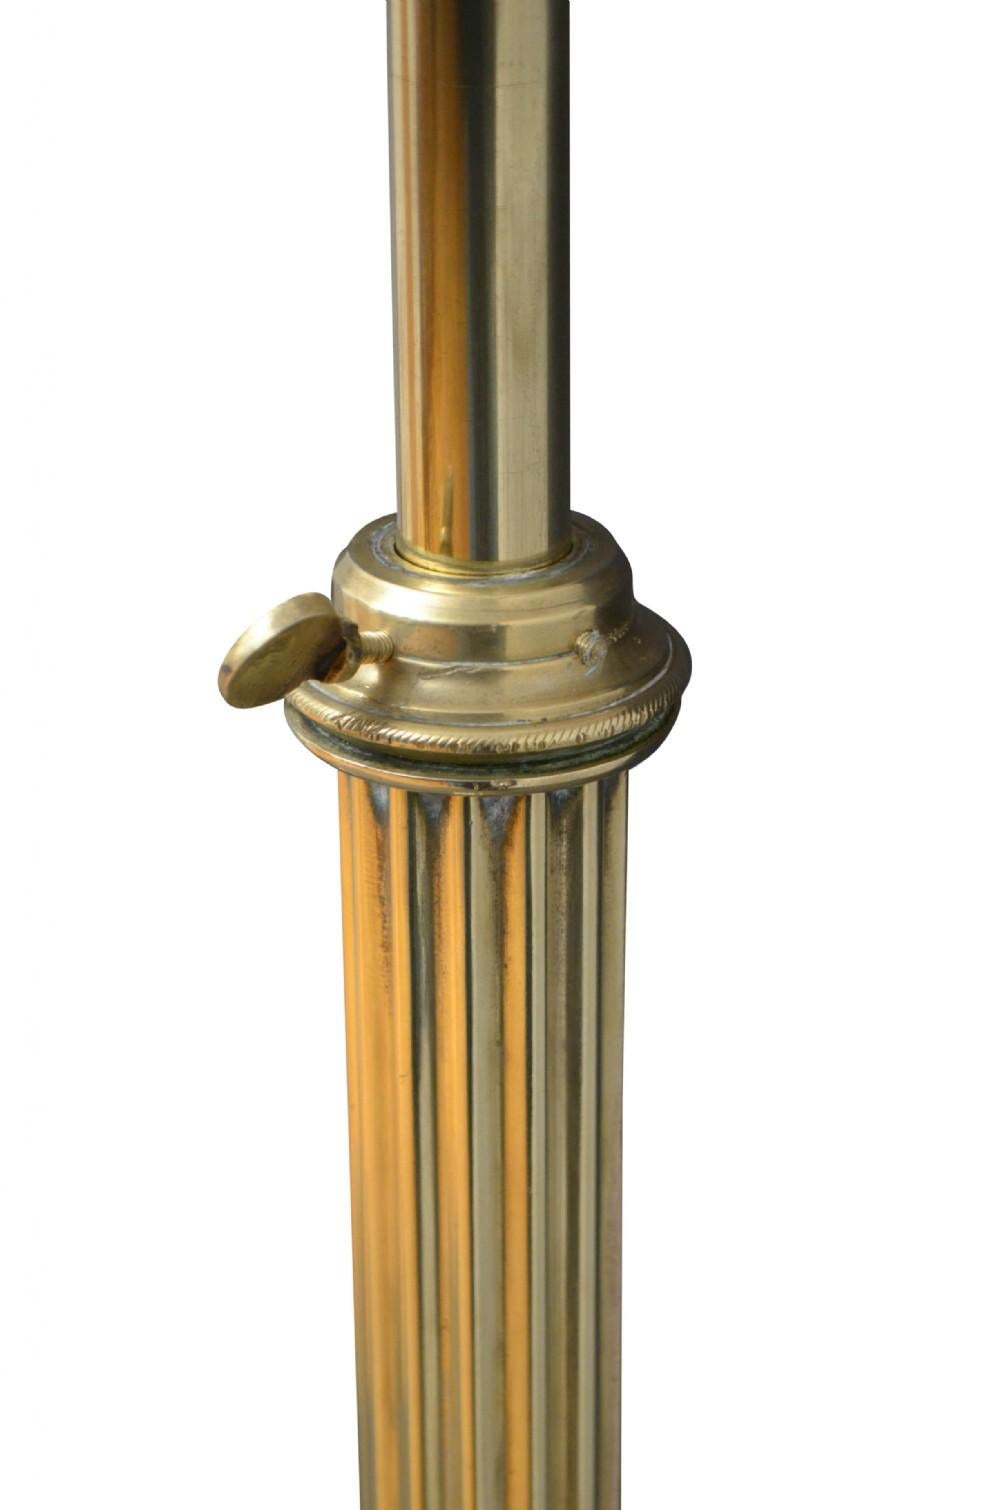 English Edwardian Copper and Brass Floor Standard Lamp